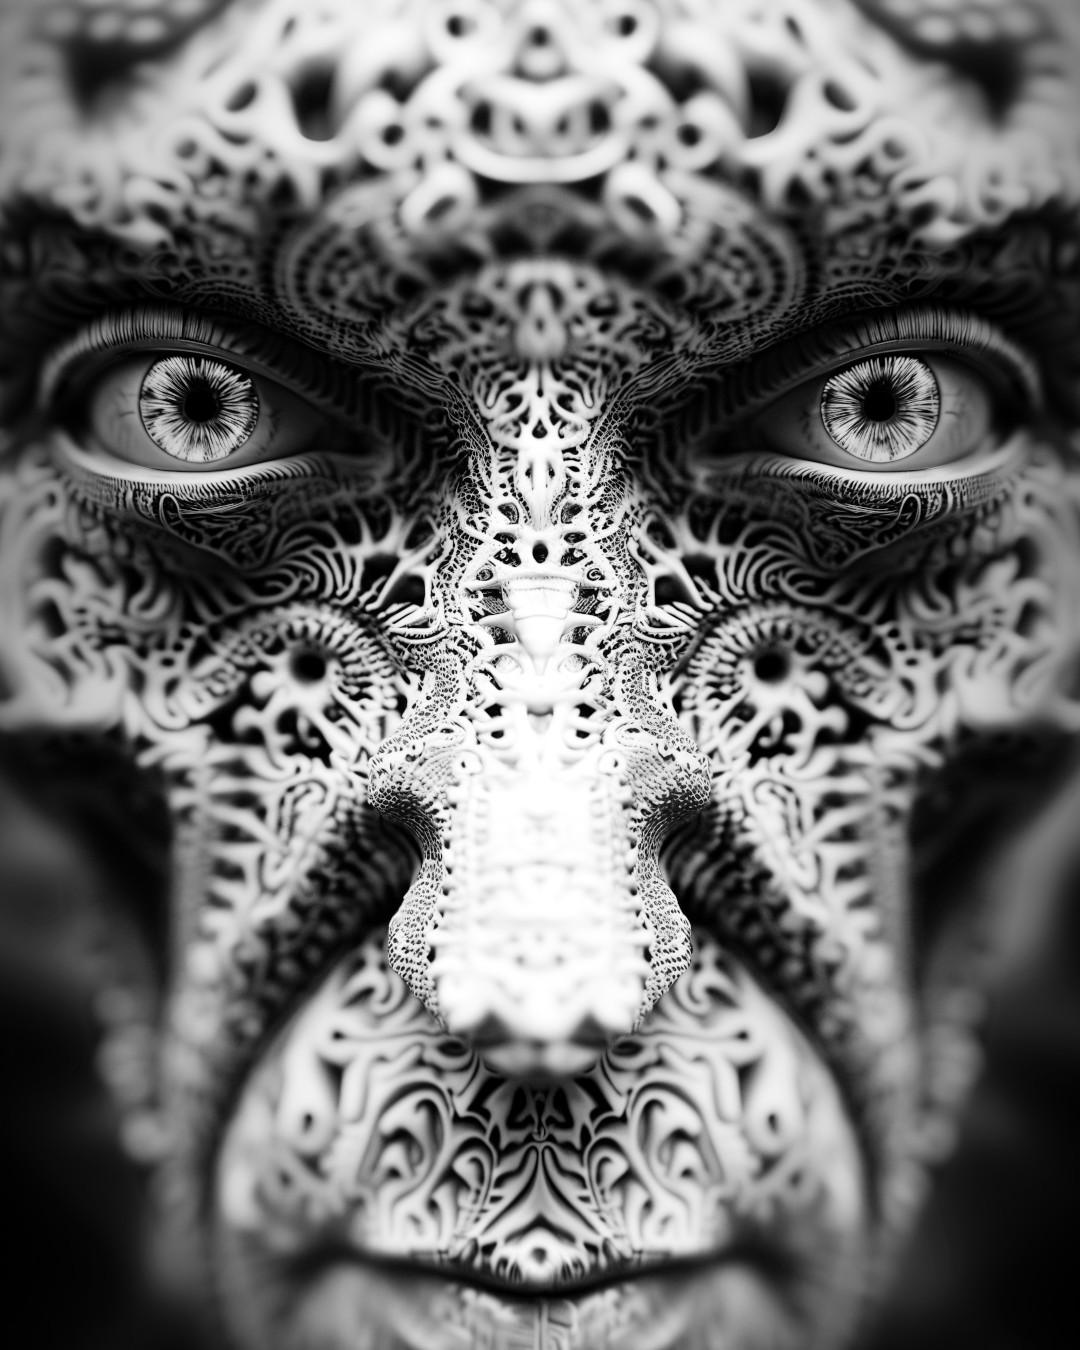 Creature intricate patterns and intense eyes, monochrome tones